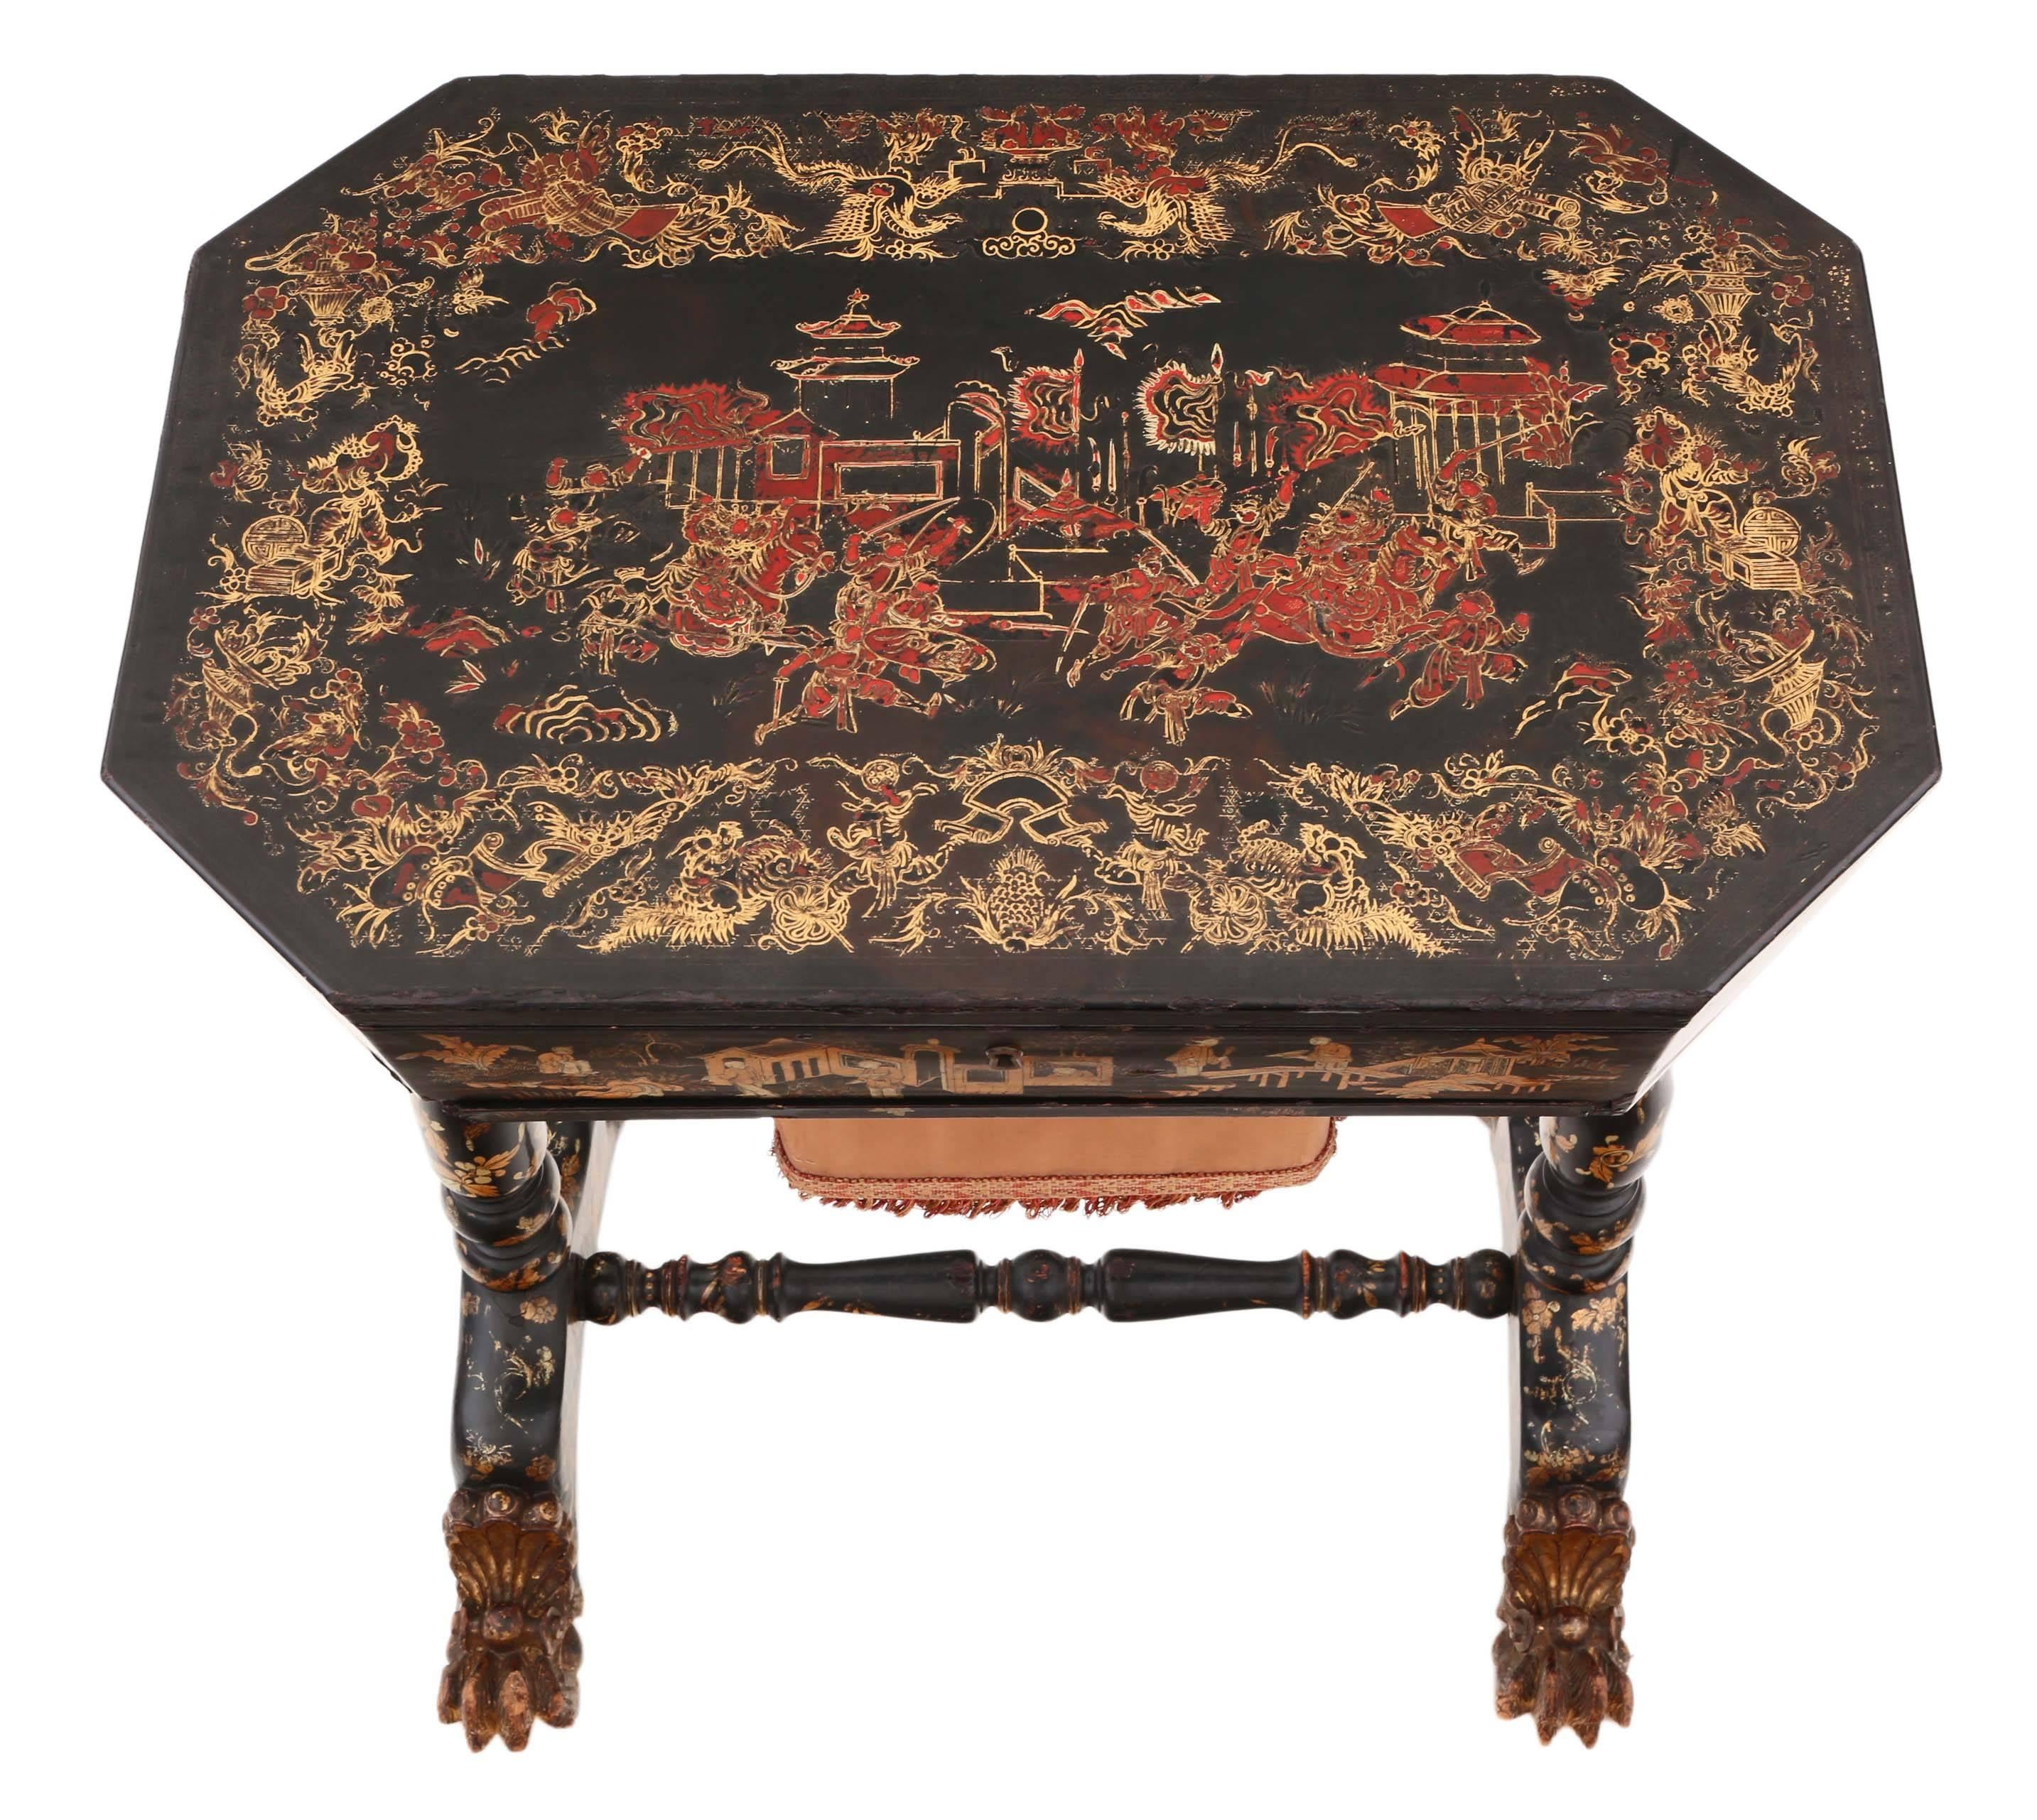 Antique 19th Century Decorated Chinoiserie Work Side Sewing Table Box In Good Condition For Sale In Wisbech, Walton Wisbech